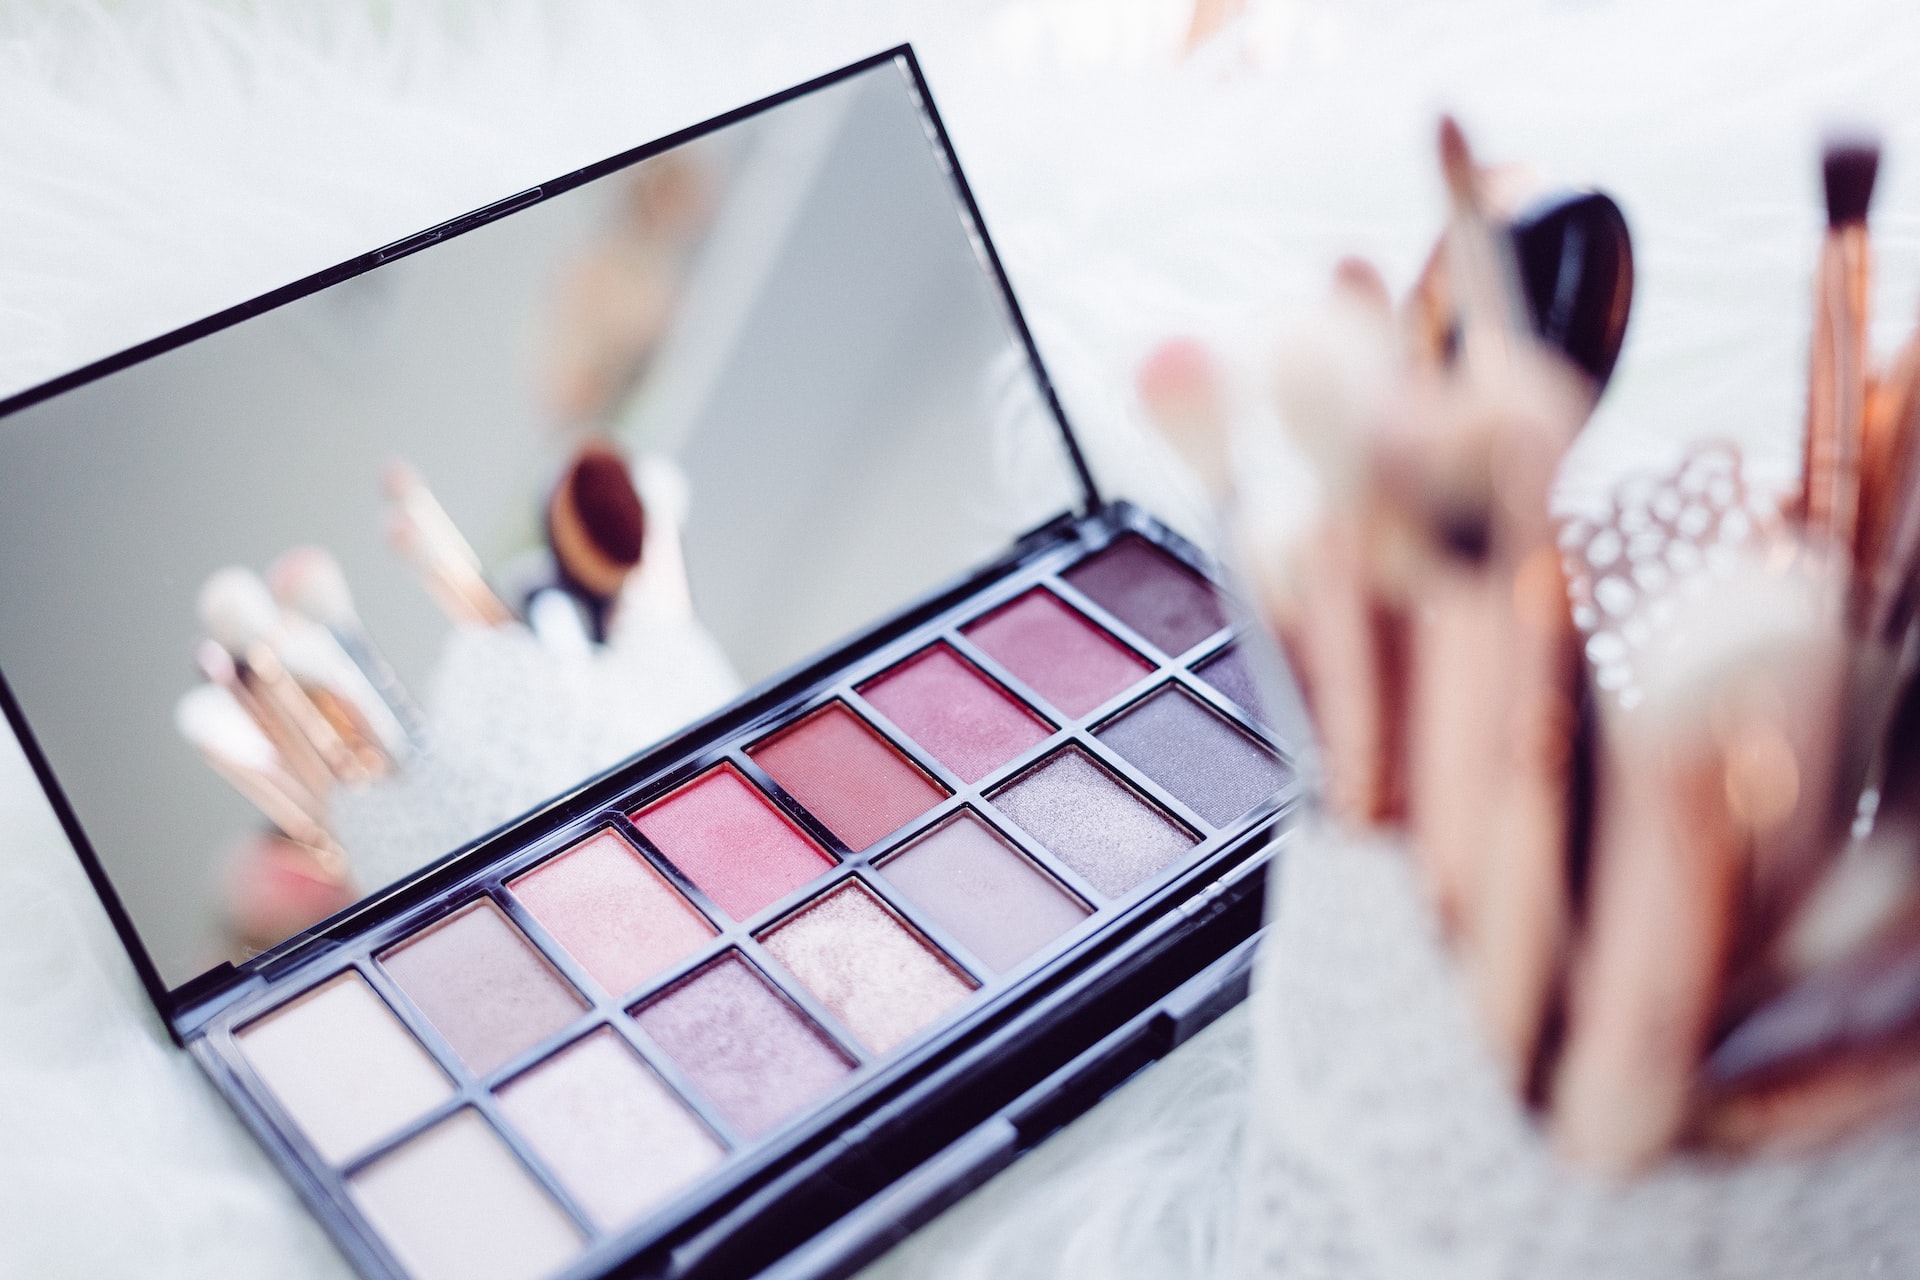 Pinterest For Beauty: How To Use The Platform To Find The Best Beauty Inspiration